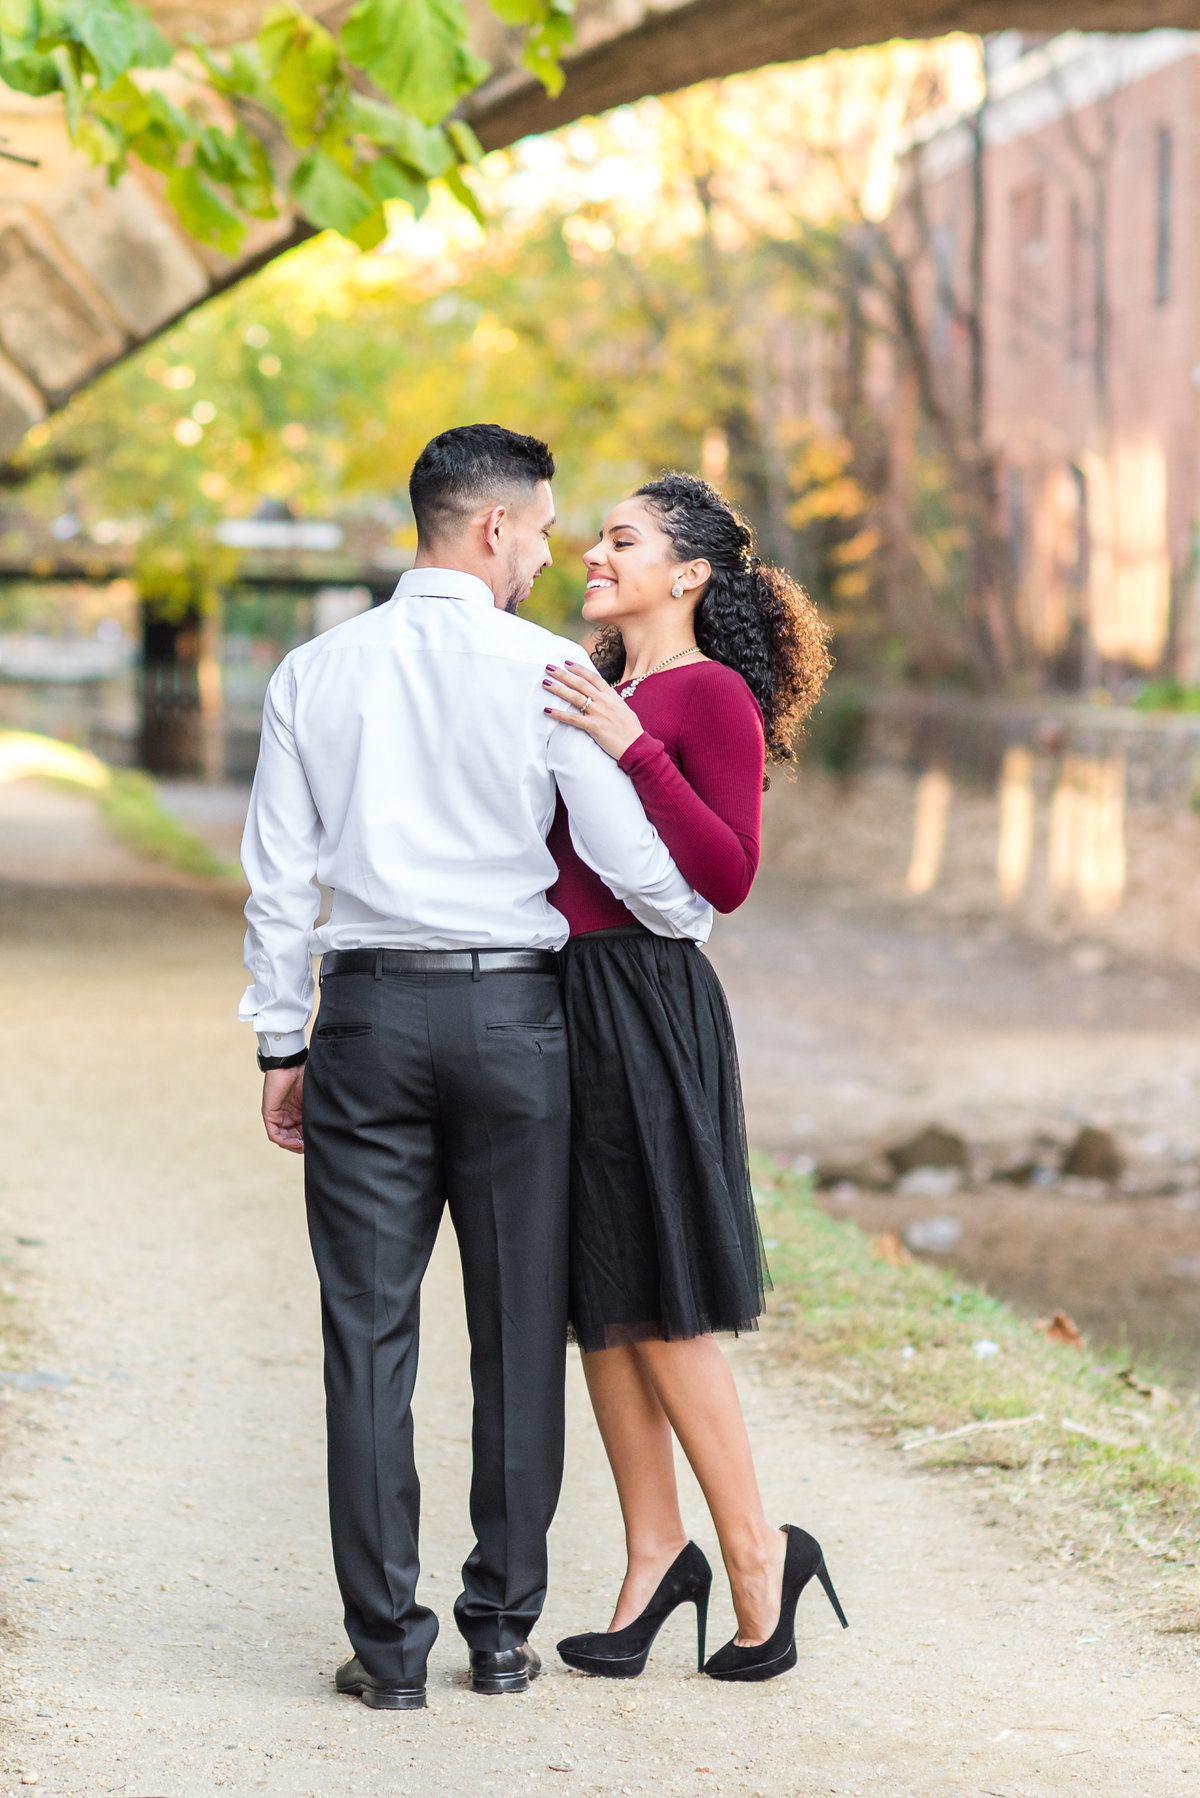 5-reasons-for-an-engagement-session-0001-4